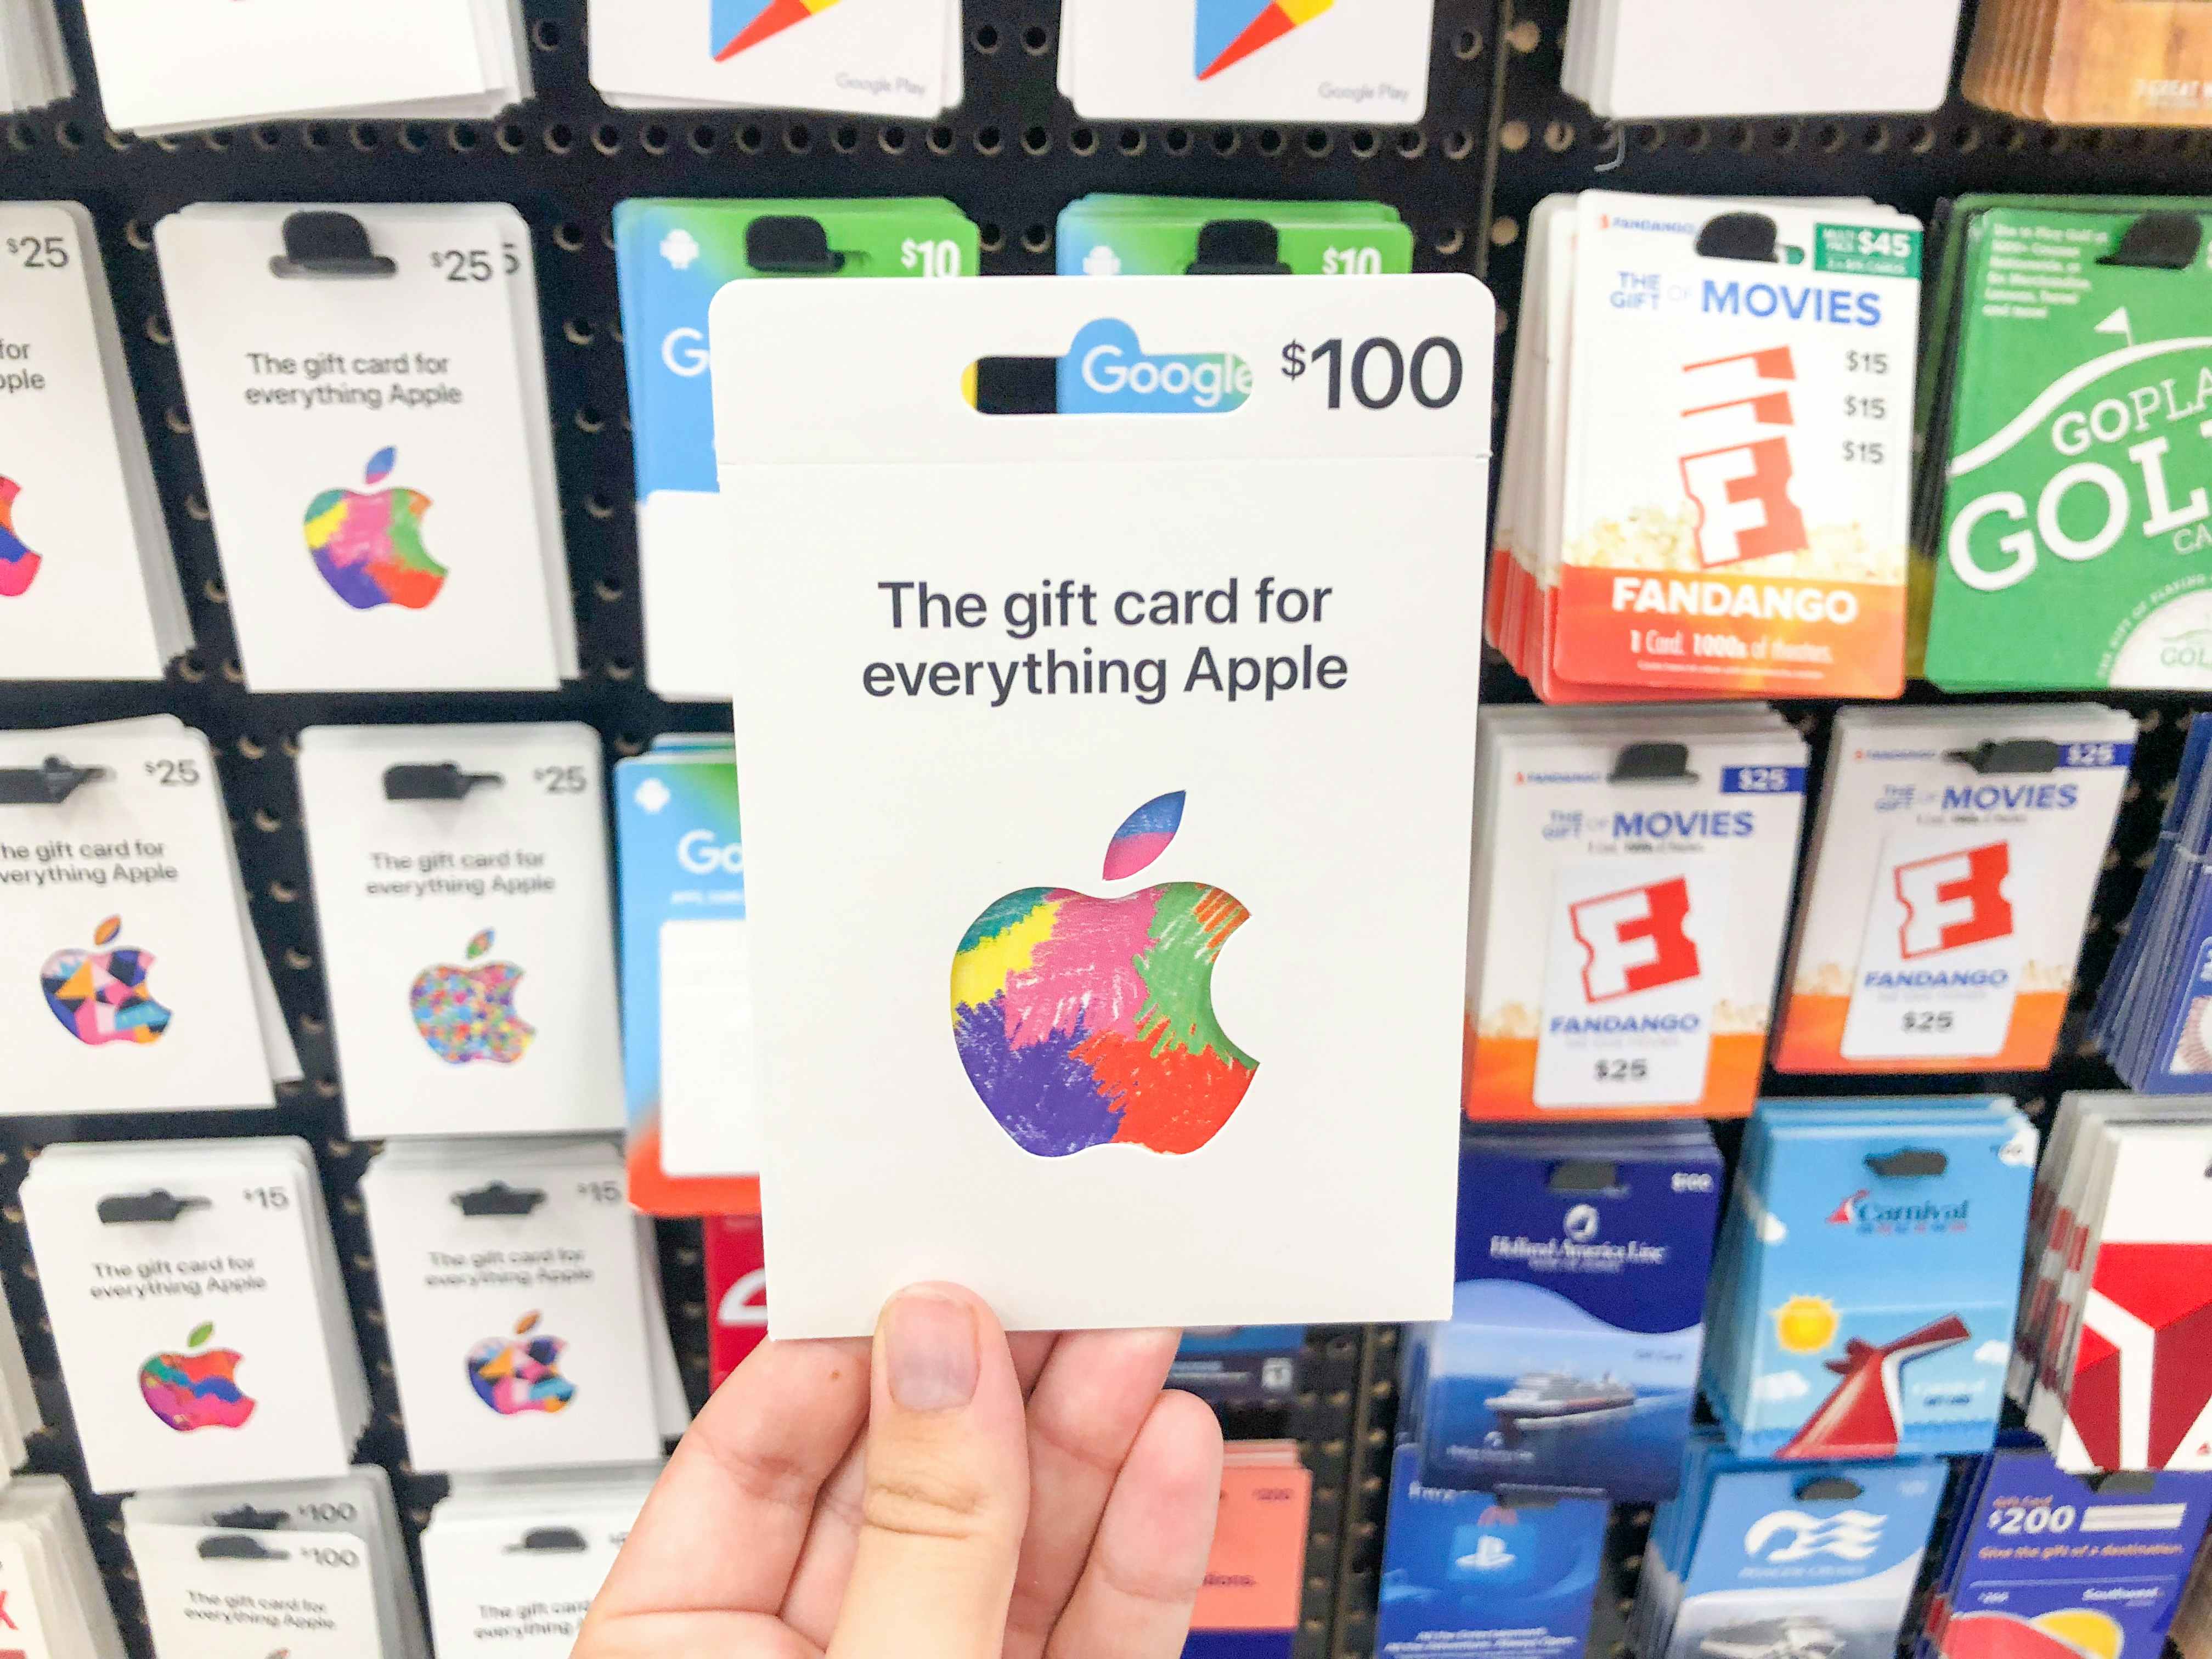 hand holding Apple gift card in front of gift card display at Target